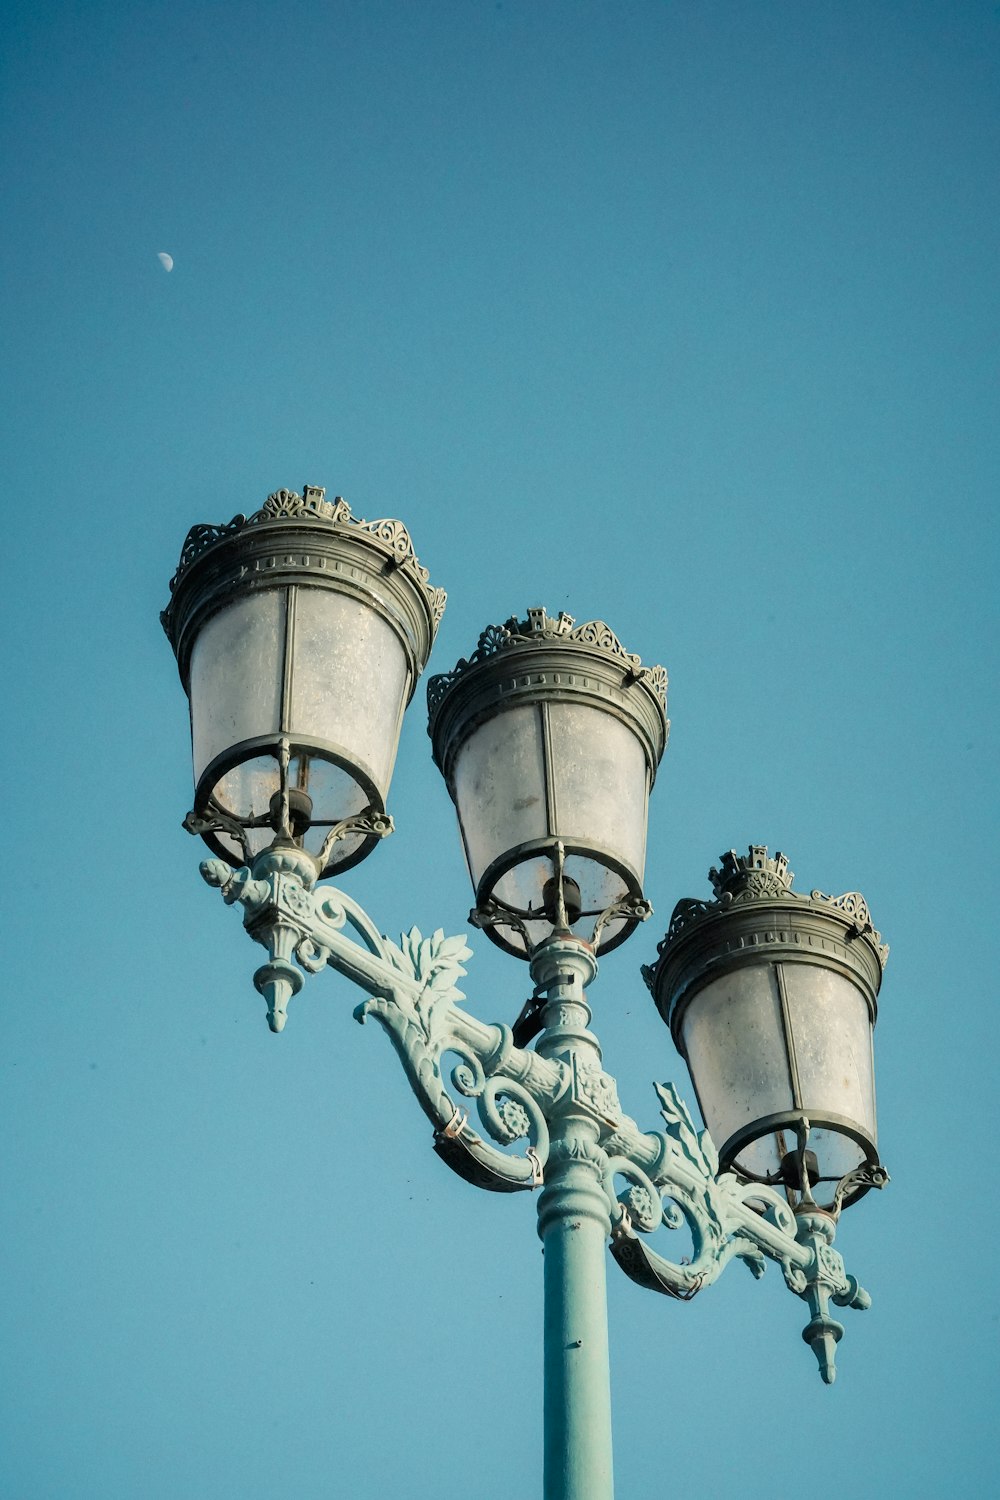 a group of street lamps